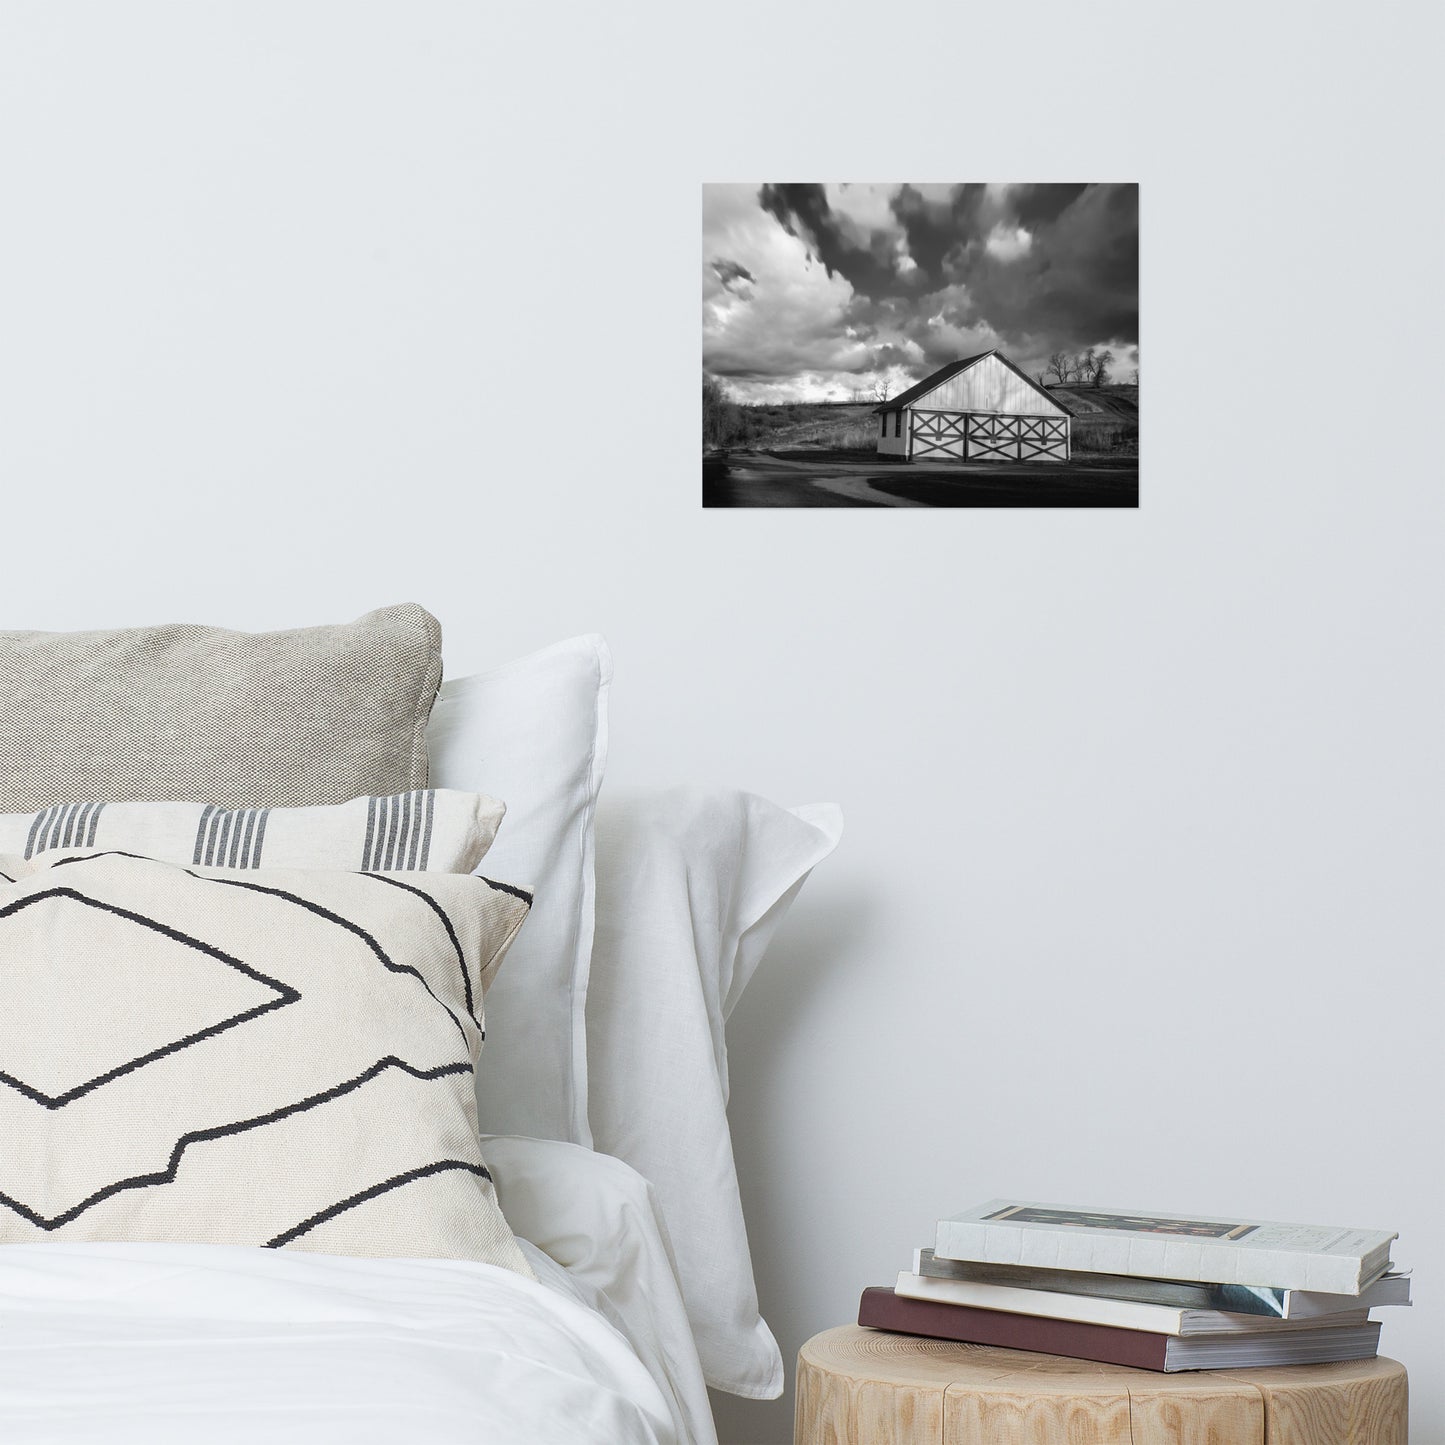 Rustic Wall Art Bedroom: Aging Barn in the Morning Sun Black and White - Rural / Country Style Landscape / Nature Photograph Loose / Unframed / Frameless / Frameable Wall Art Print - Artwork